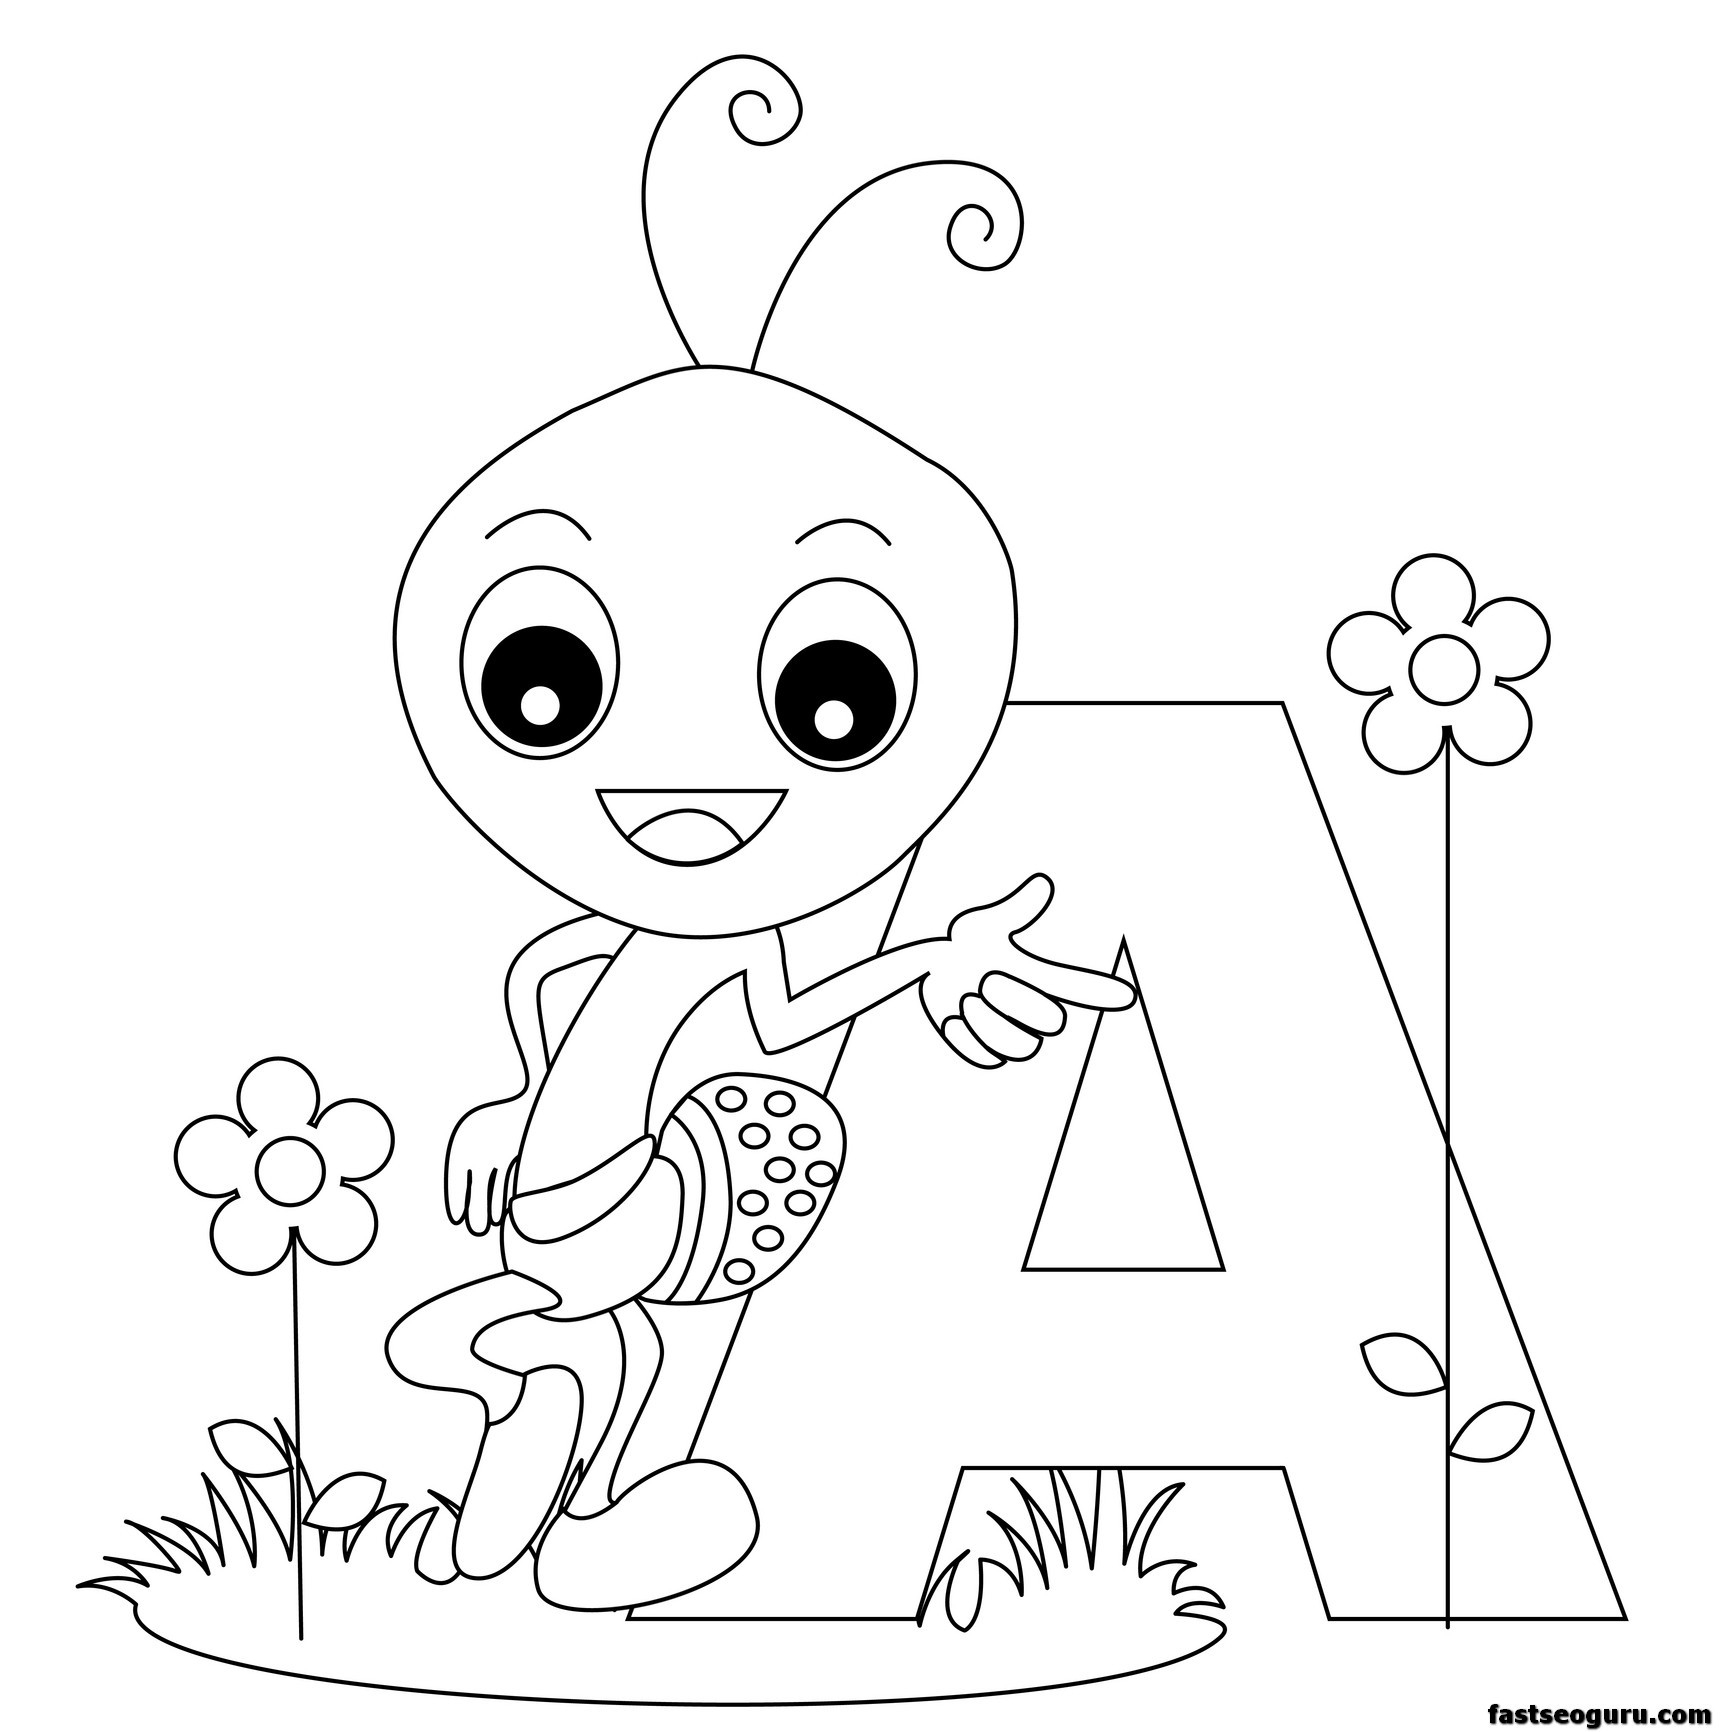 the-letter-i-coloring-pages-at-getdrawings-free-download